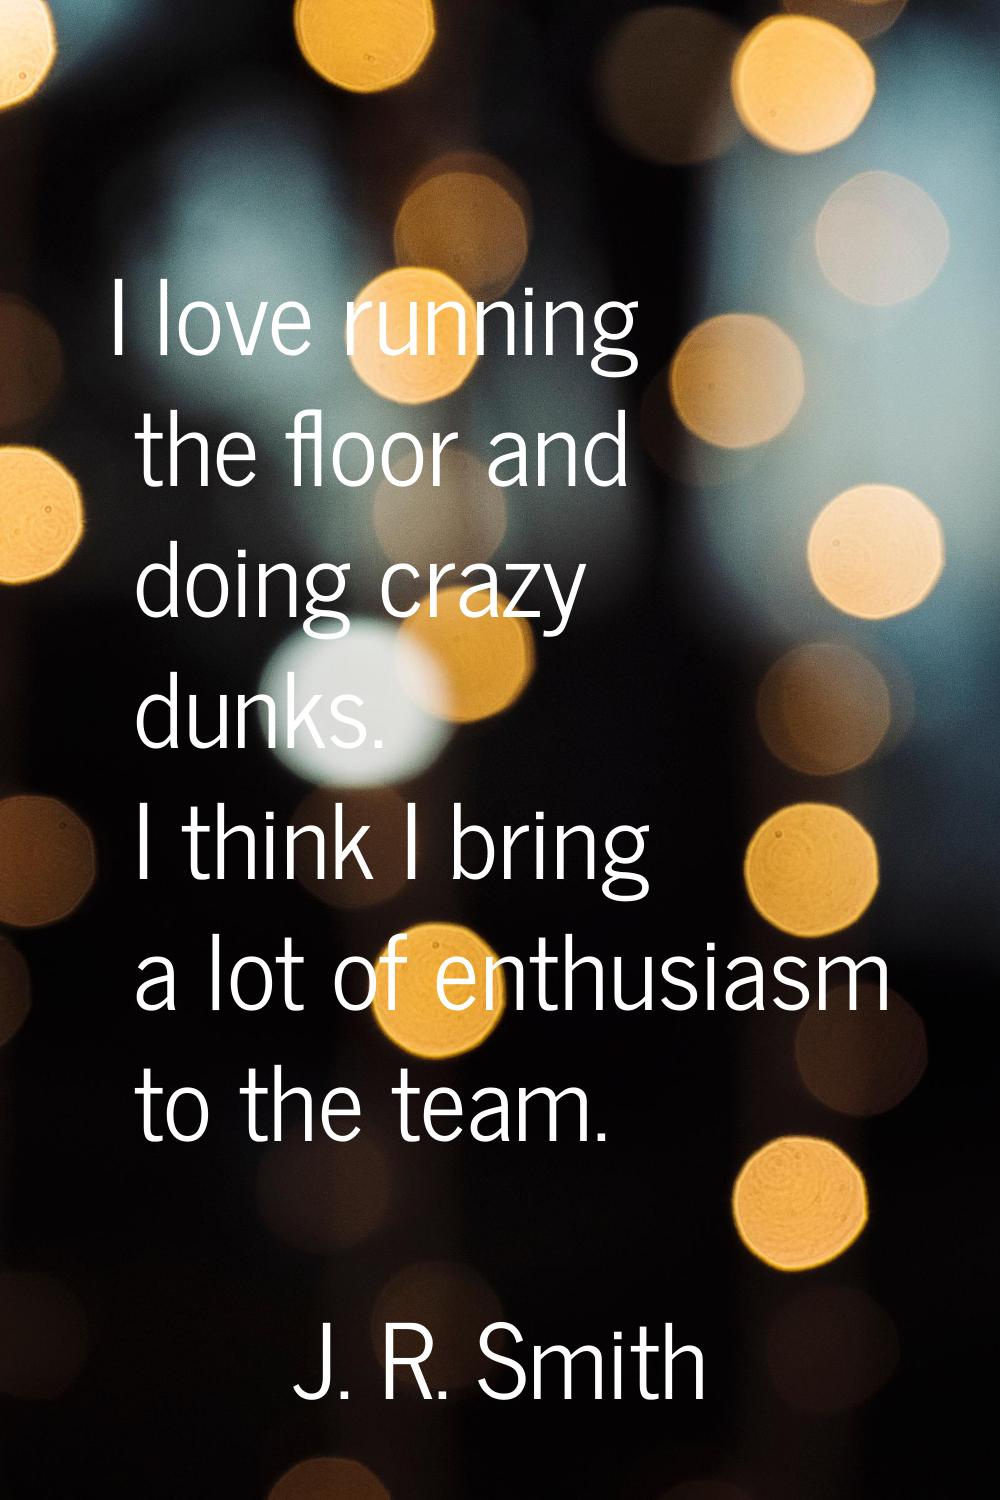 I love running the floor and doing crazy dunks. I think I bring a lot of enthusiasm to the team.